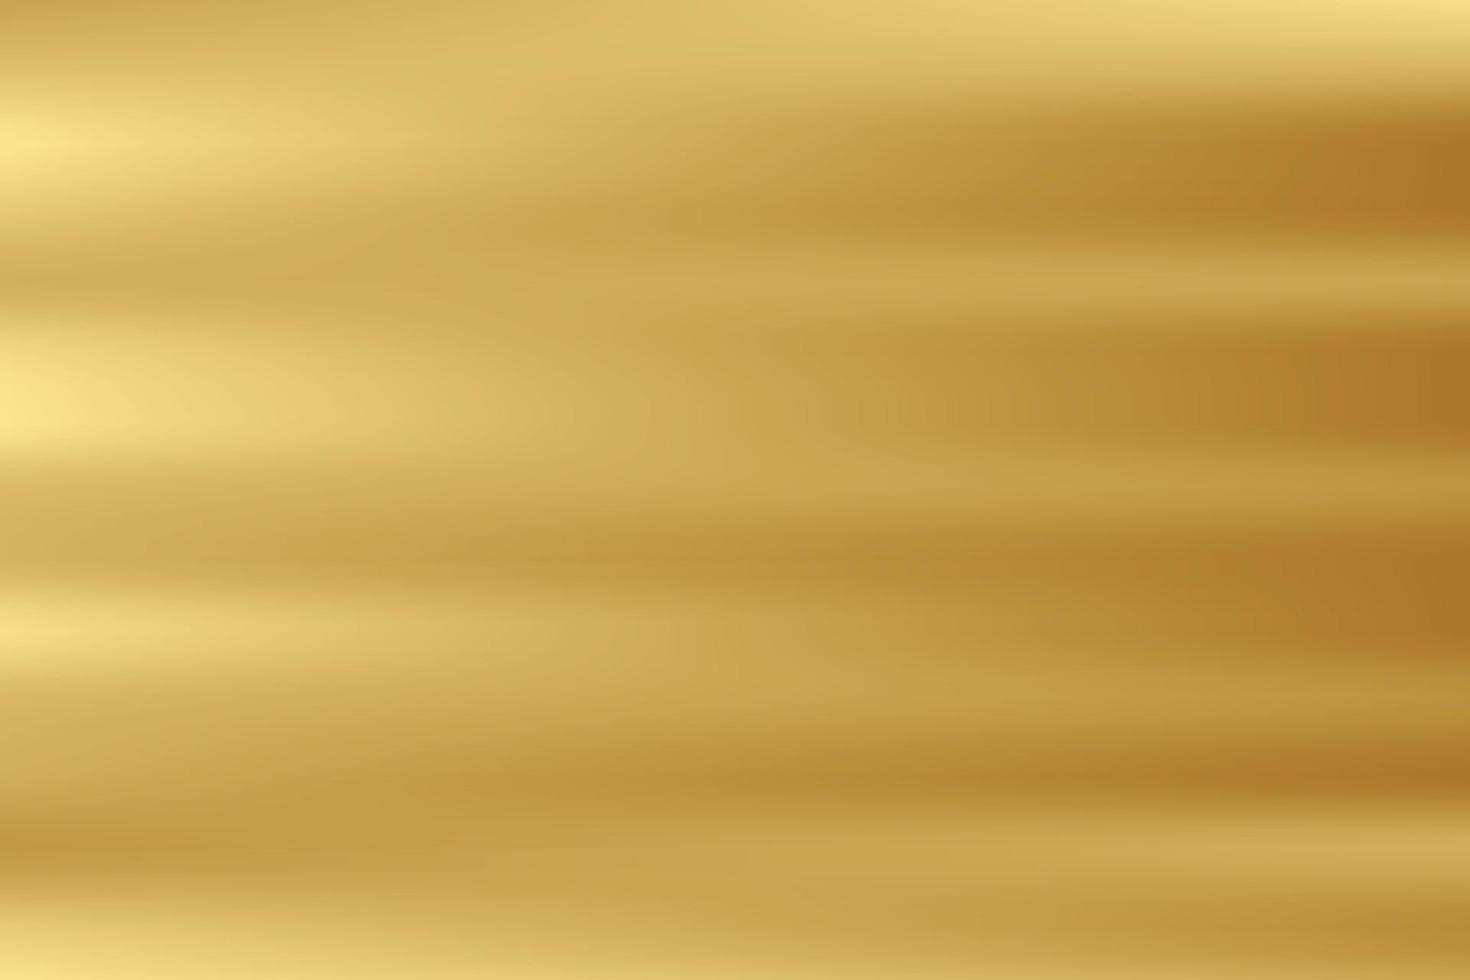 Gold abstract blurred gradient background. Vector illustration.